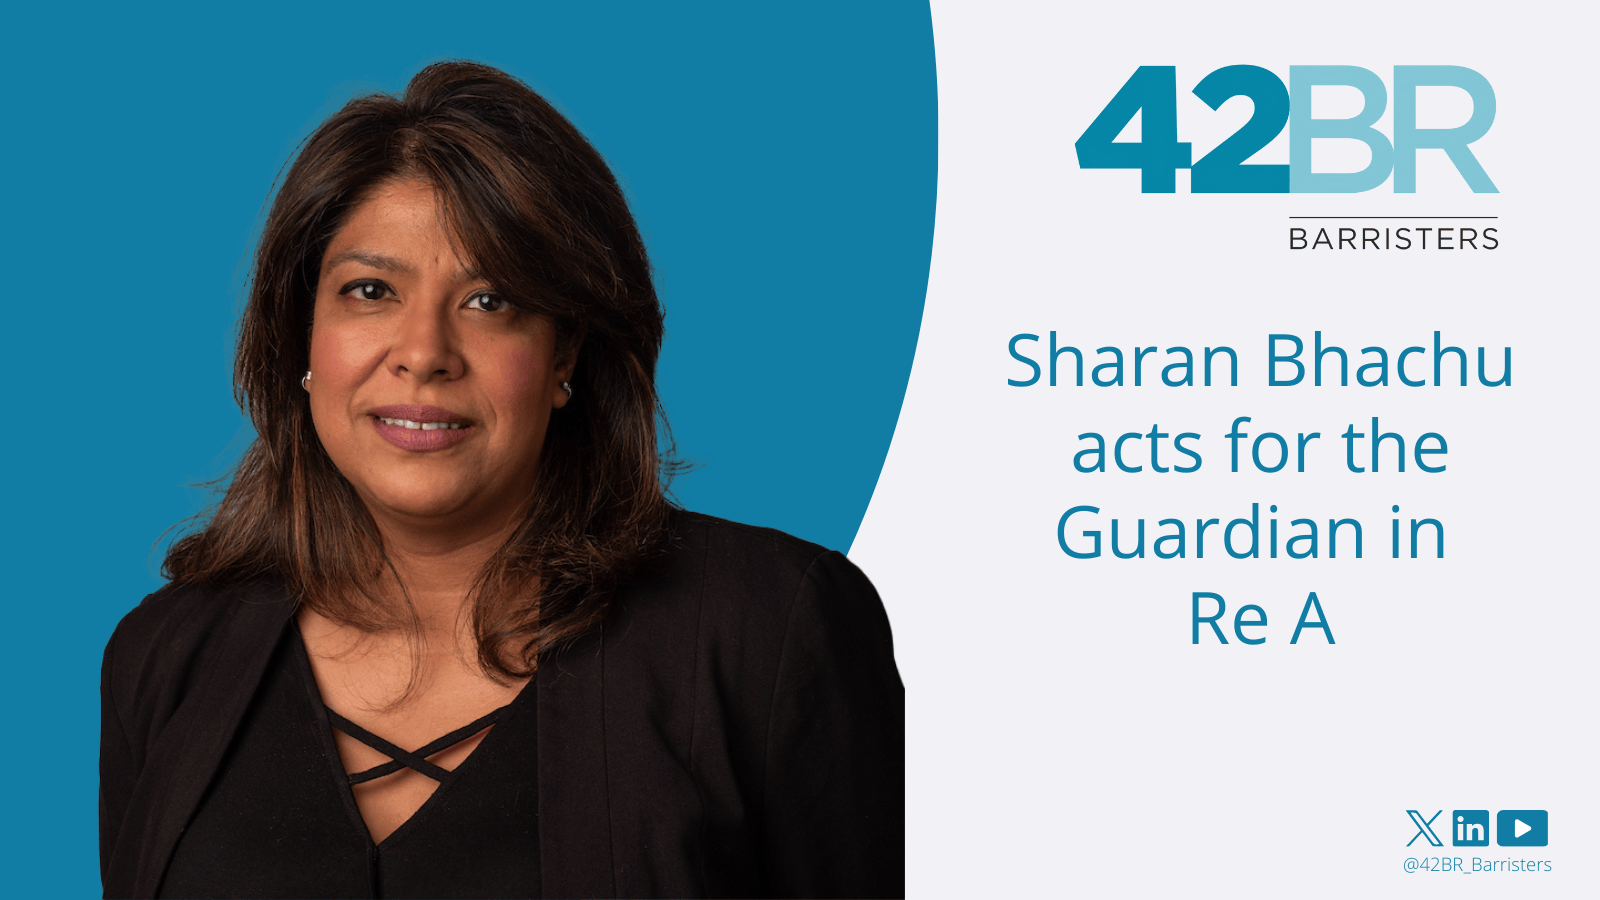 Sharan Bhachu represents the Guardian in Re A